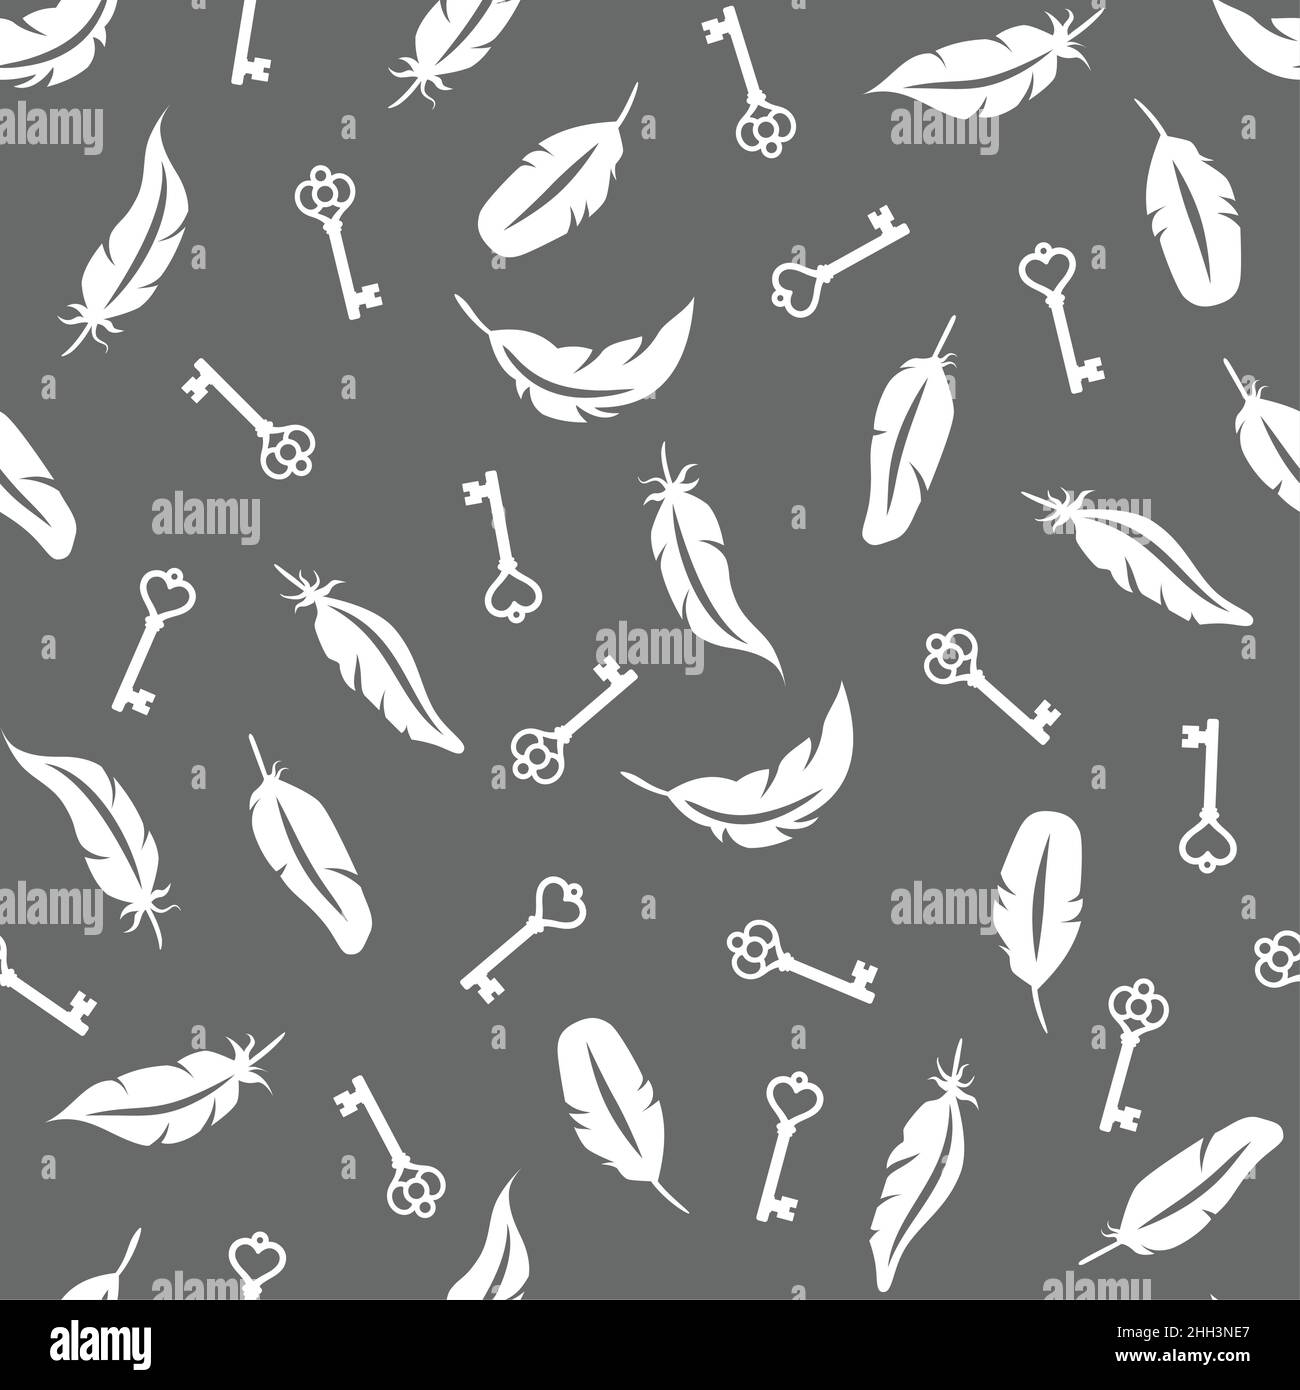 Bird feather and vintage key print design. Vector seamless pattern with keys and feathers. Stock Vector